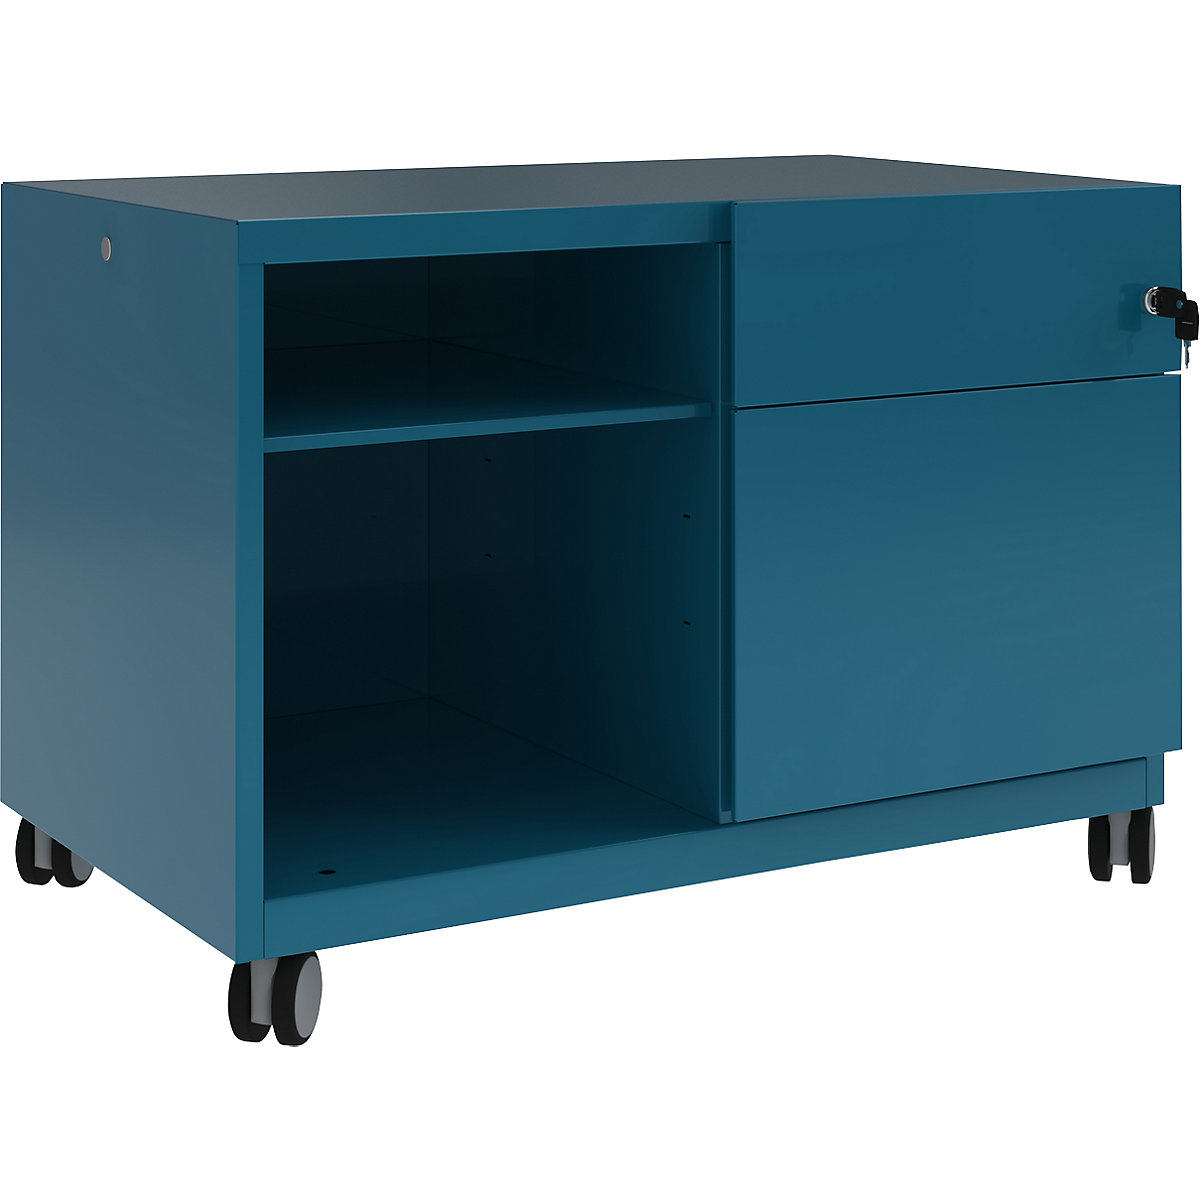 Note™ CADDY, HxBxT 563 x 800 x 490 mm – BISLEY, 1 universal drawer and suspension file drawer on the right, azure-14